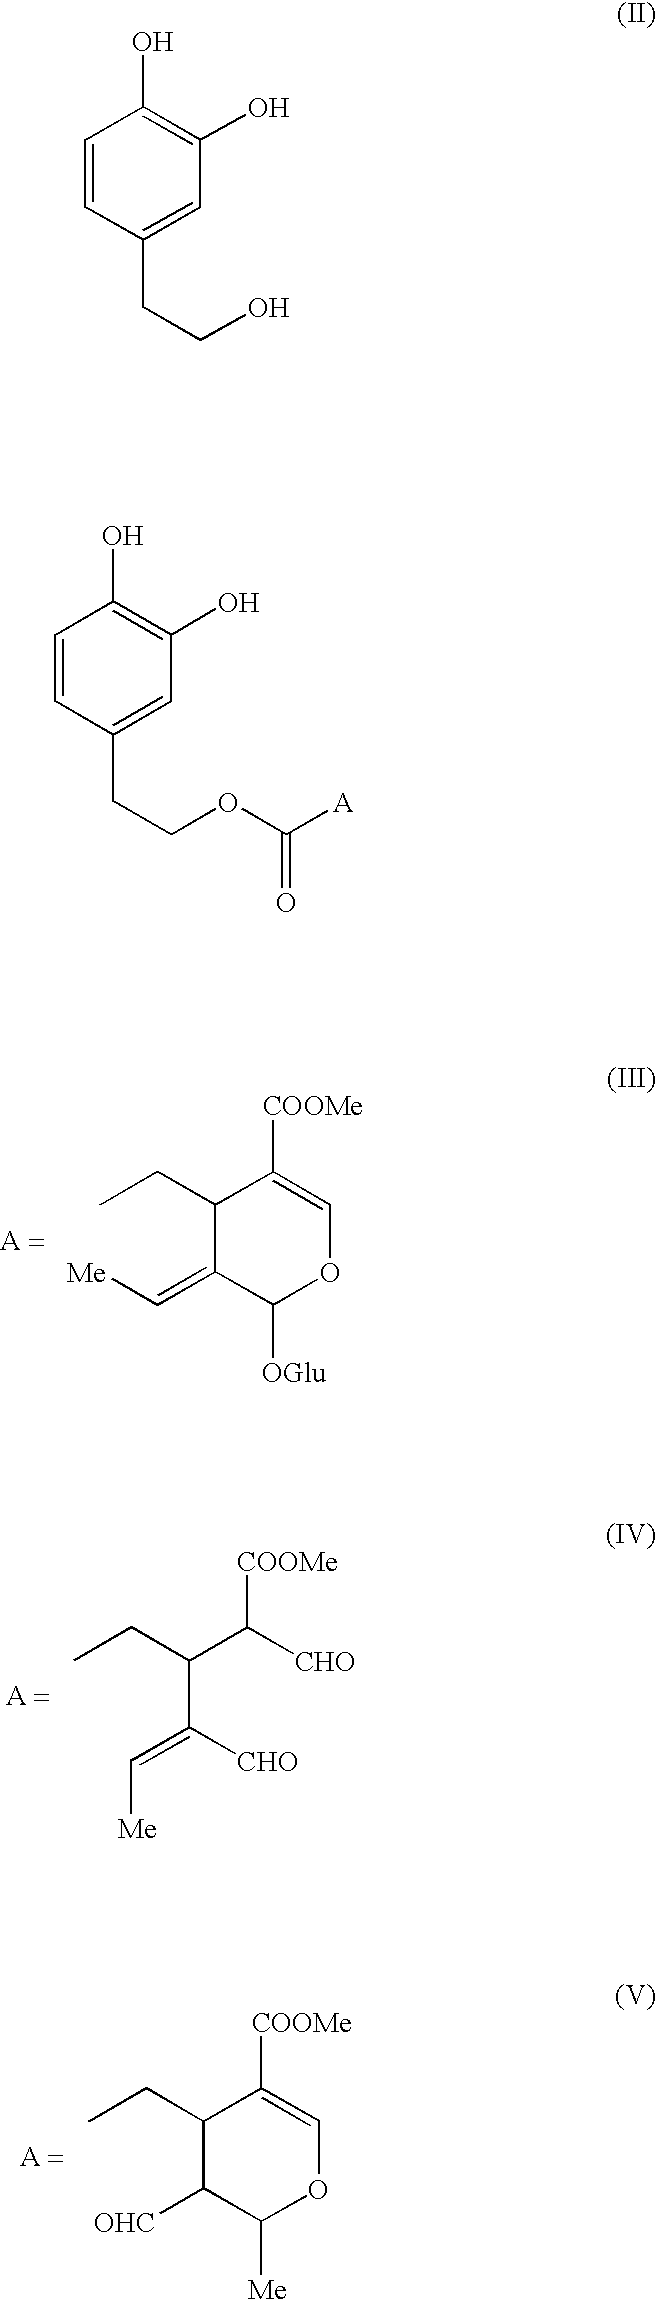 Method of preparing hydroxytyrosol esters, esters thus obtained and use of same